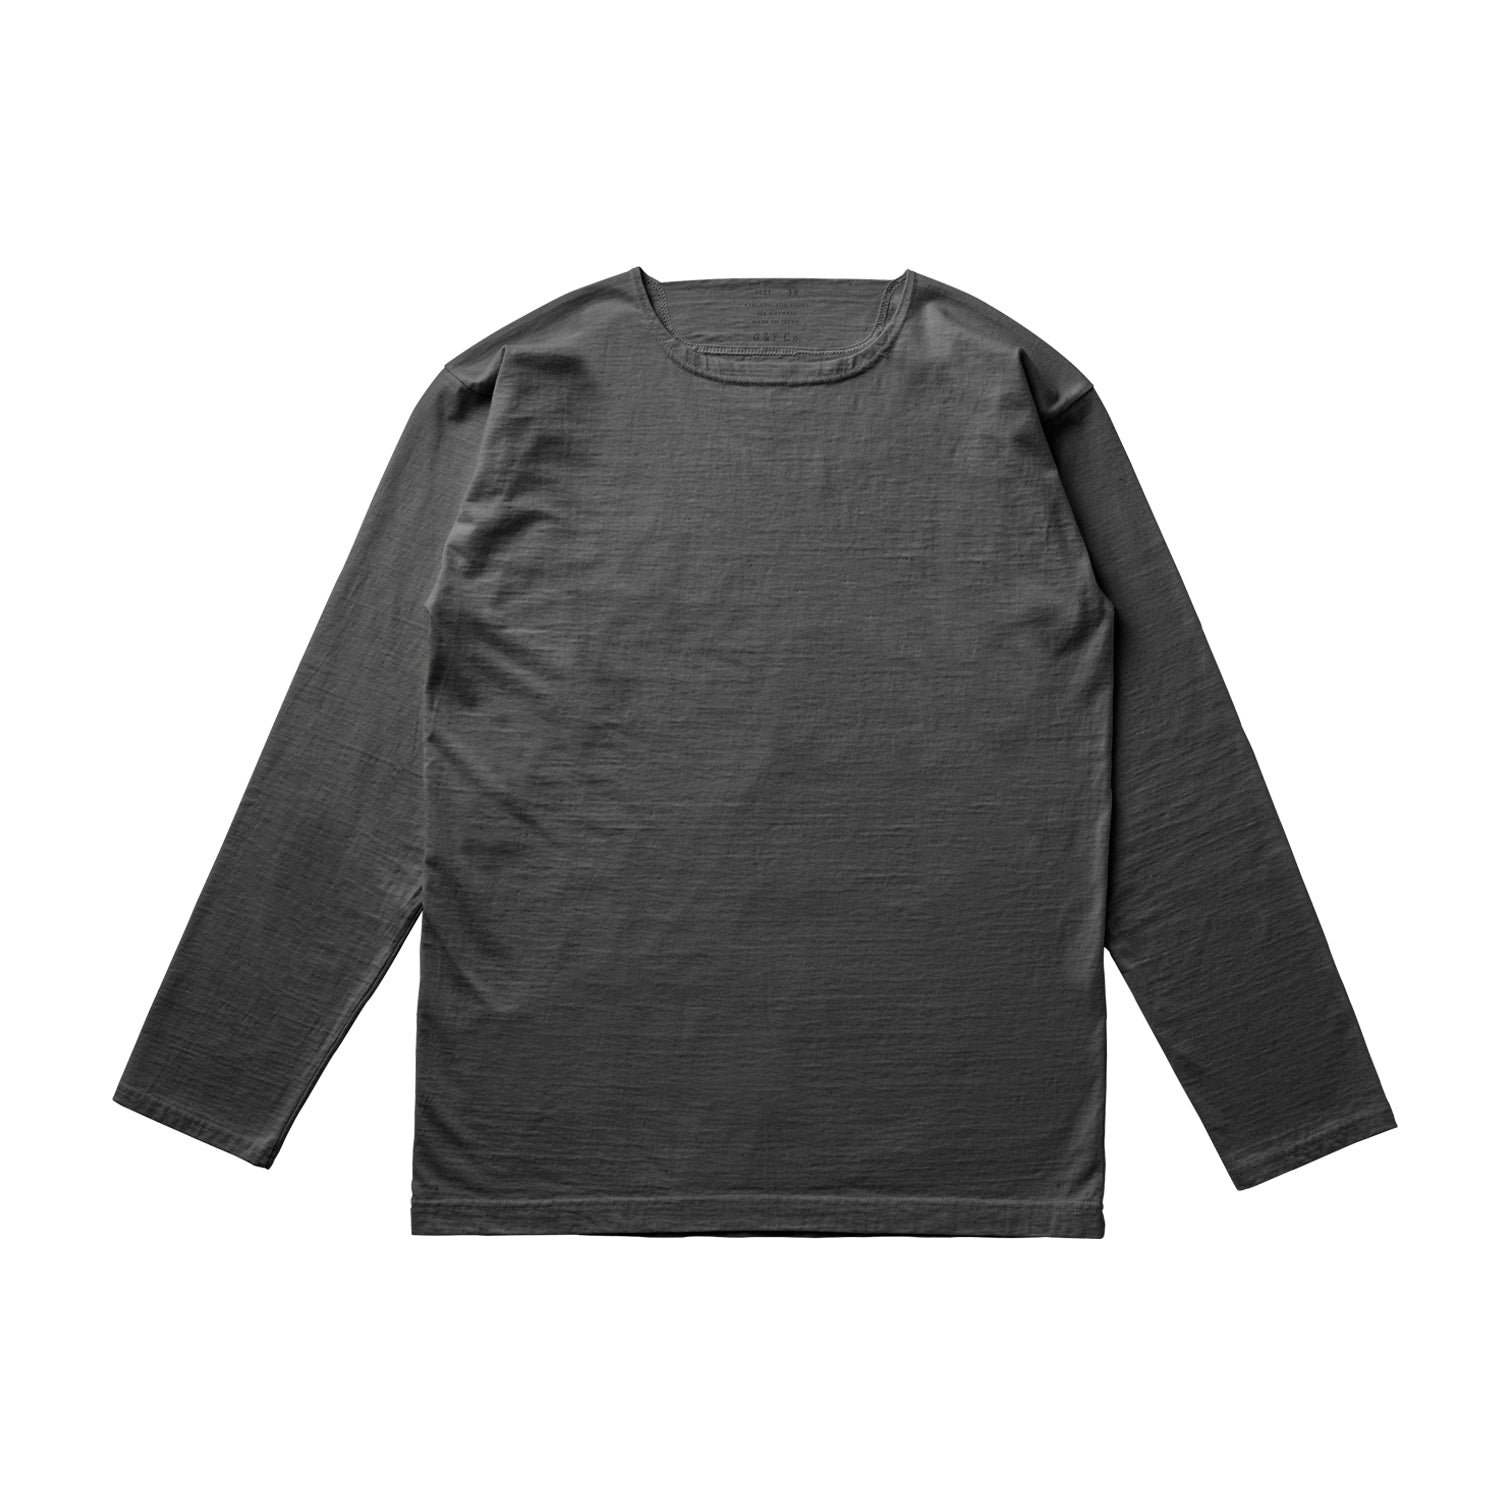 G&F Co. -EARLY BASQUE SHIRTS-INK BLACK